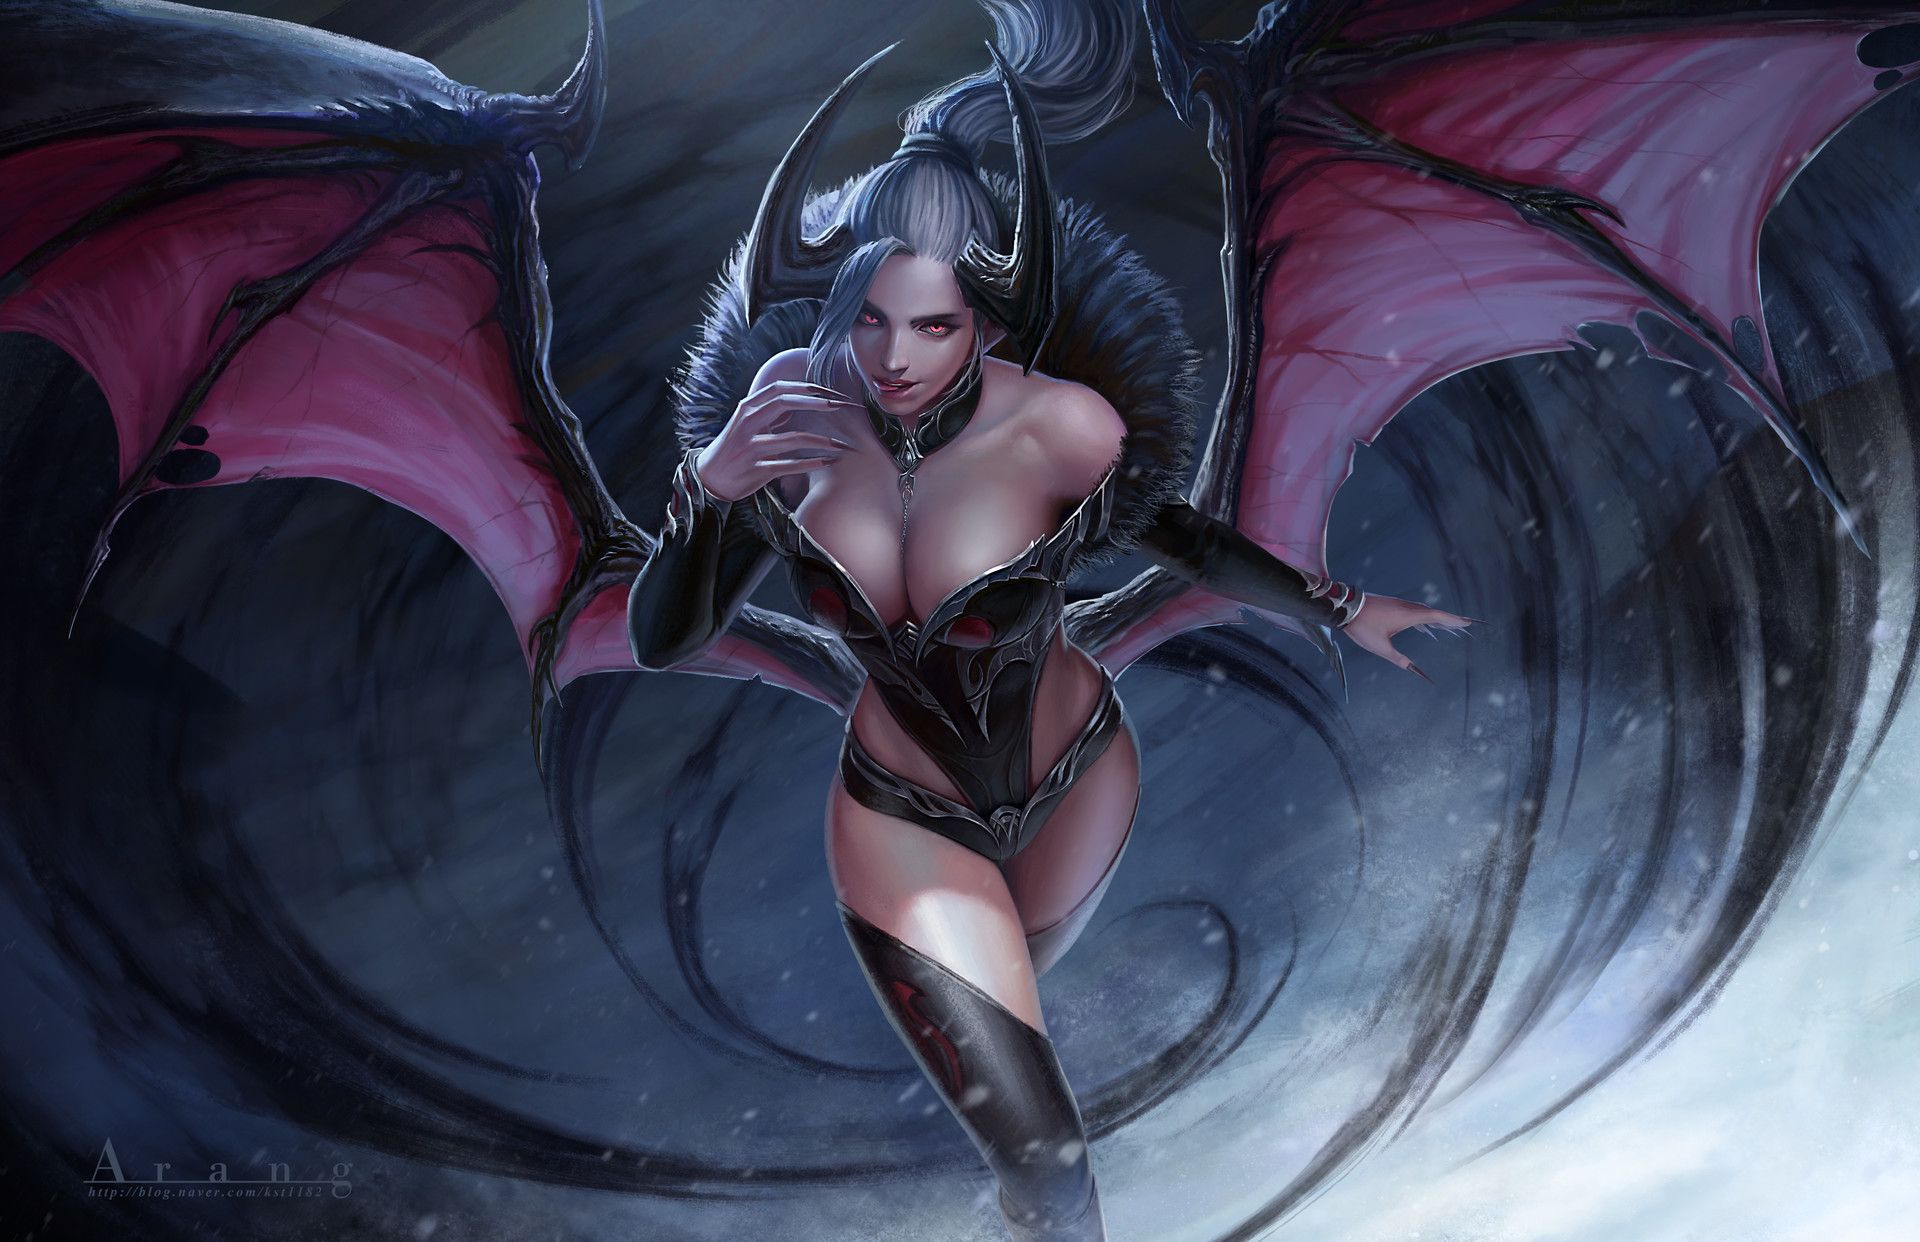 Amazind demoness: devil girl fantasy character (FullHD Wallpapers): Original anime characters (Artist: A-rang)